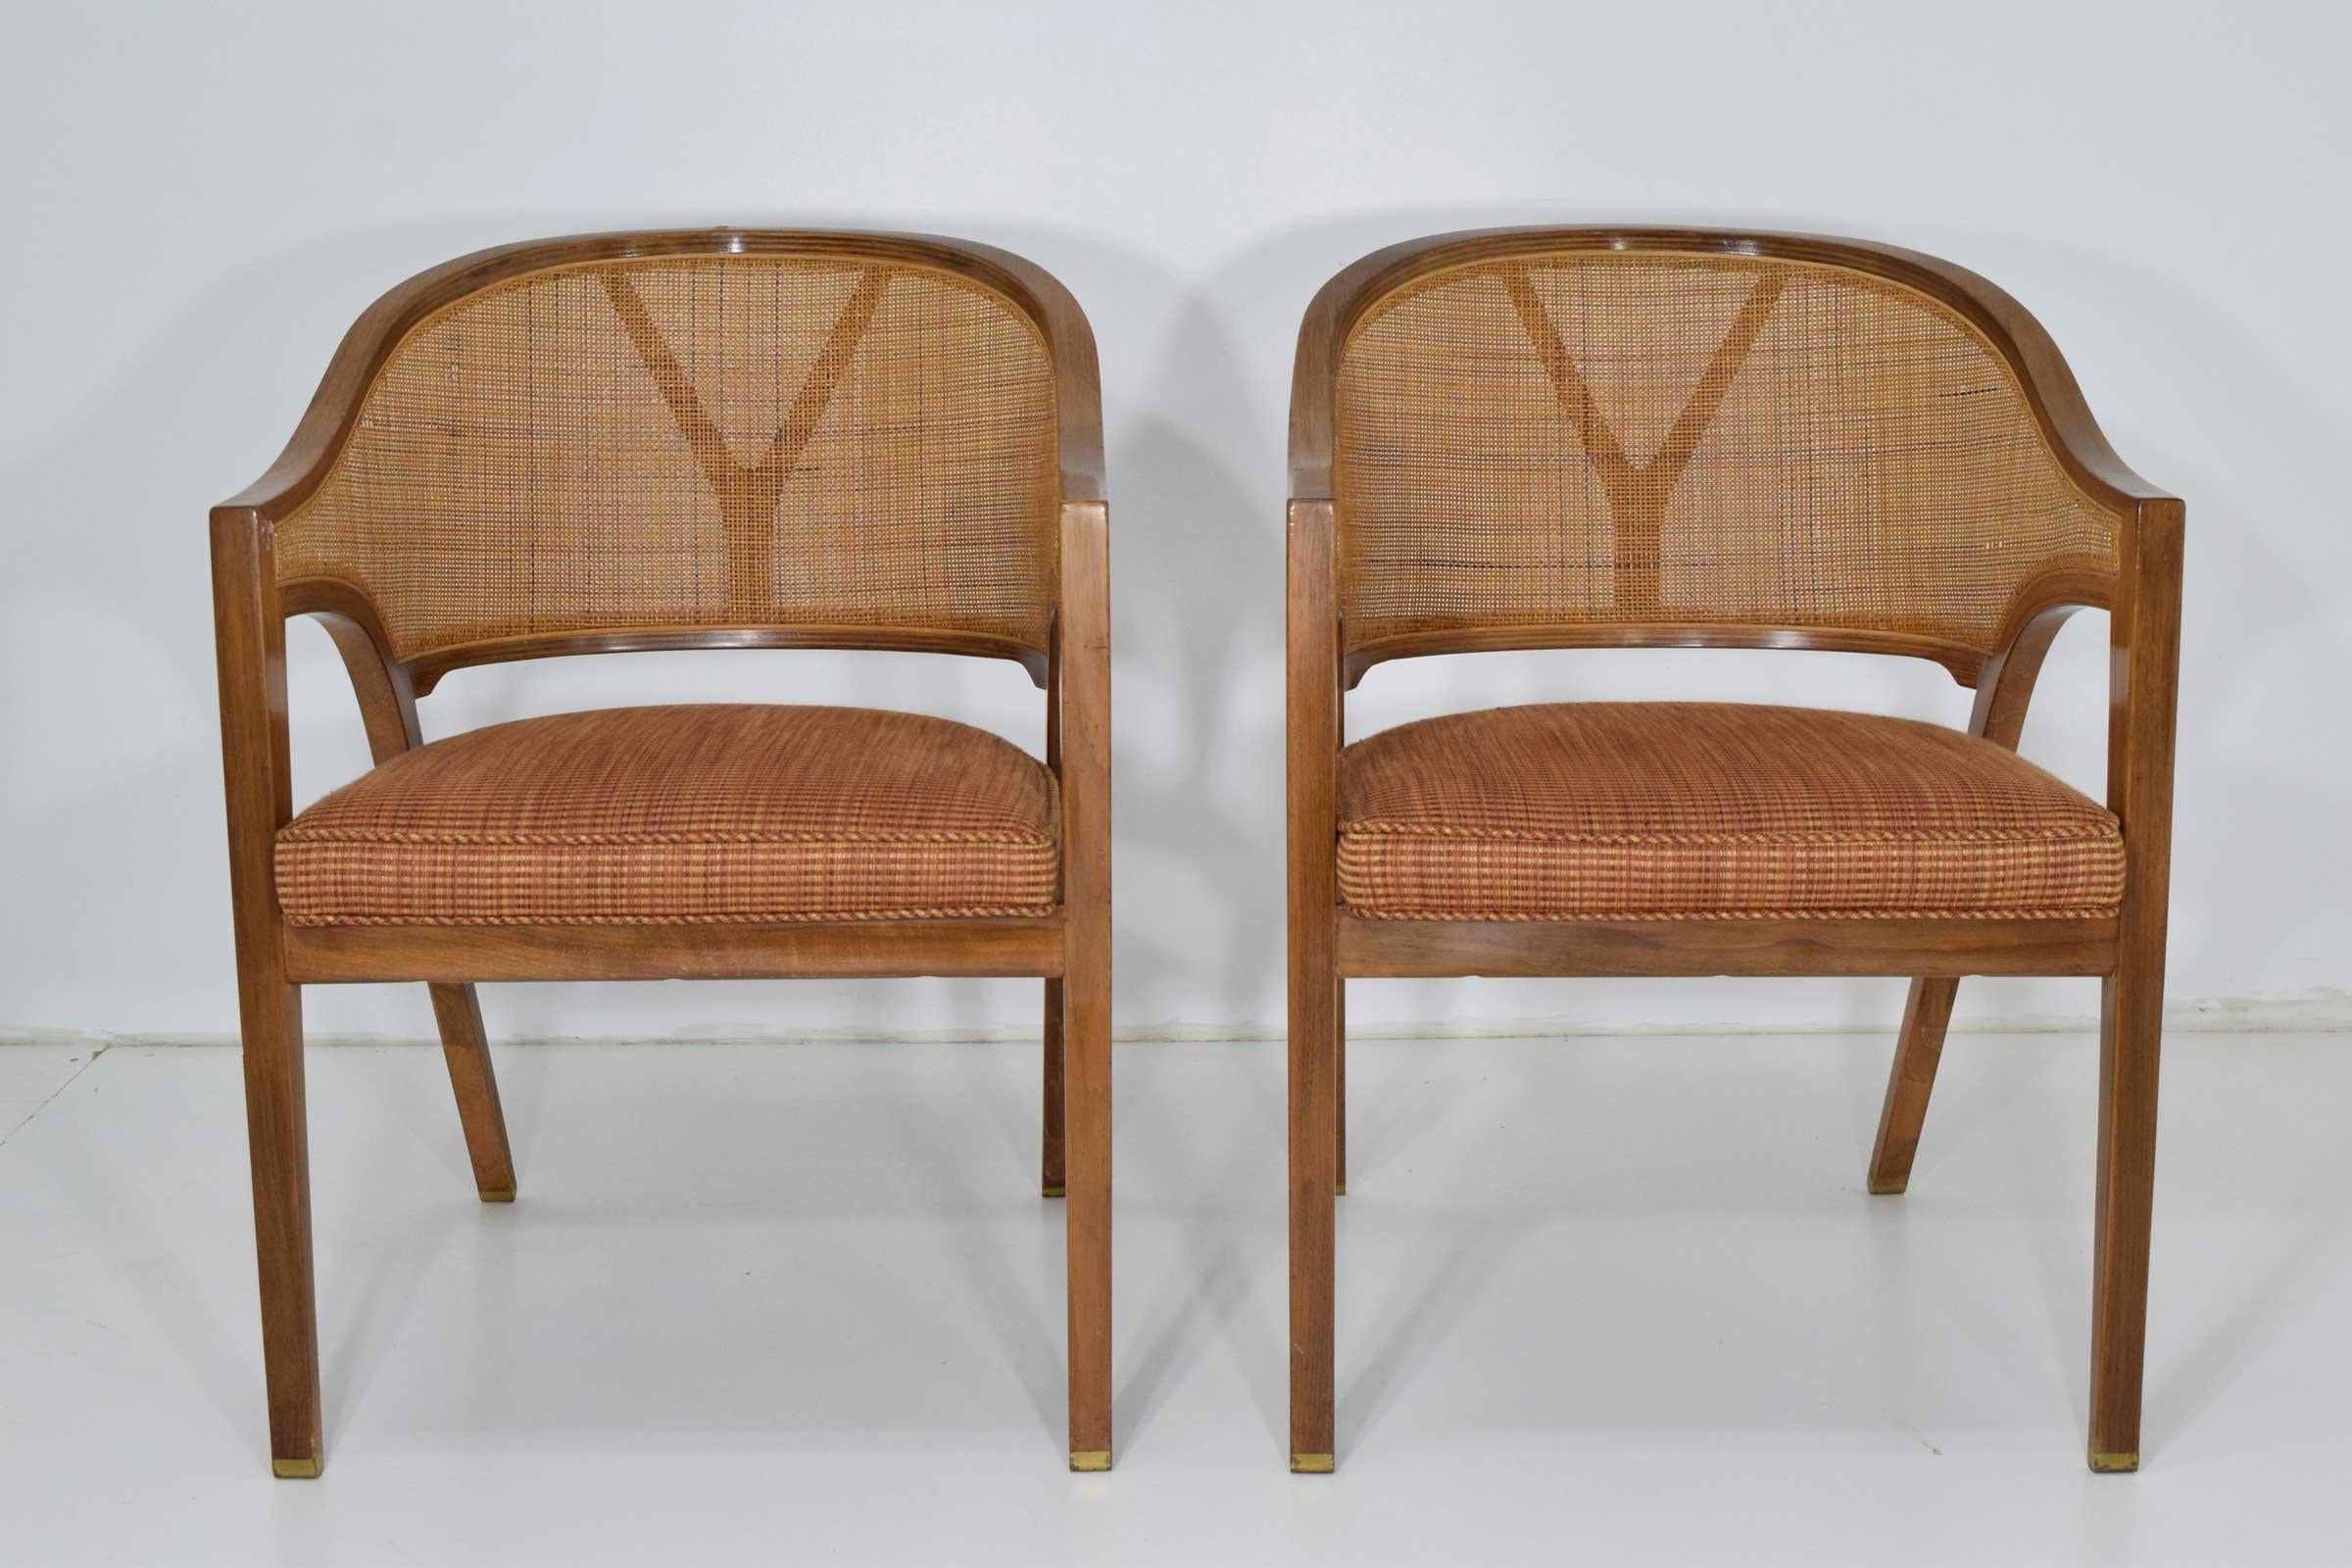 Beautiful cane back, brass shoes, layered bentwood, chair is amazingly comfortable and a Classic design by Edward Wormley for Dunbar.